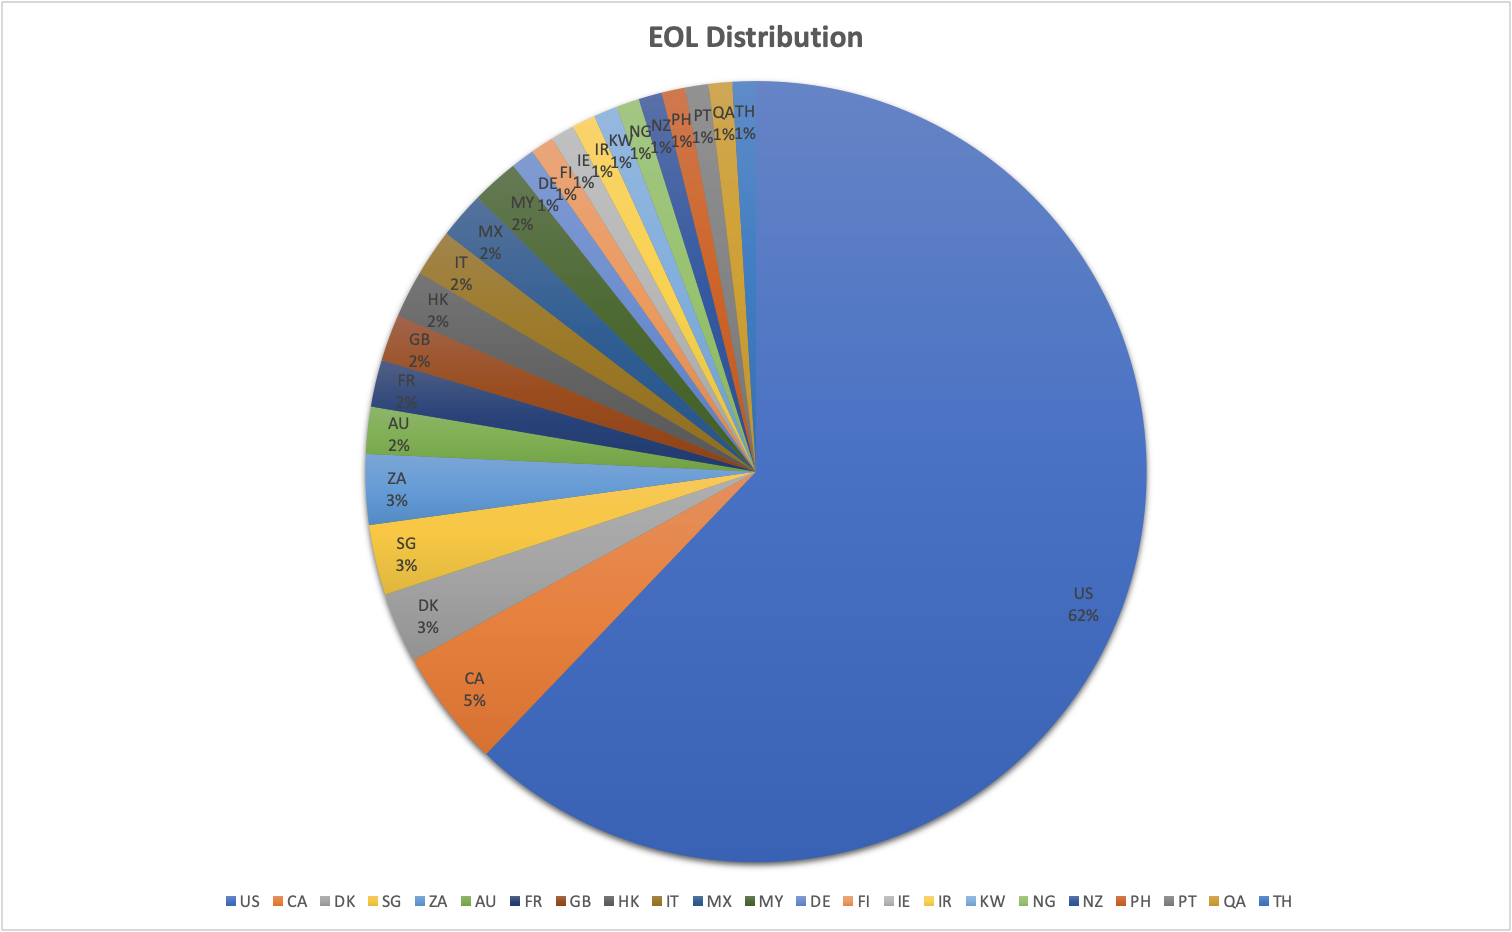 Fig. 3 - Distribution of End of Life (EOL) versions by geography